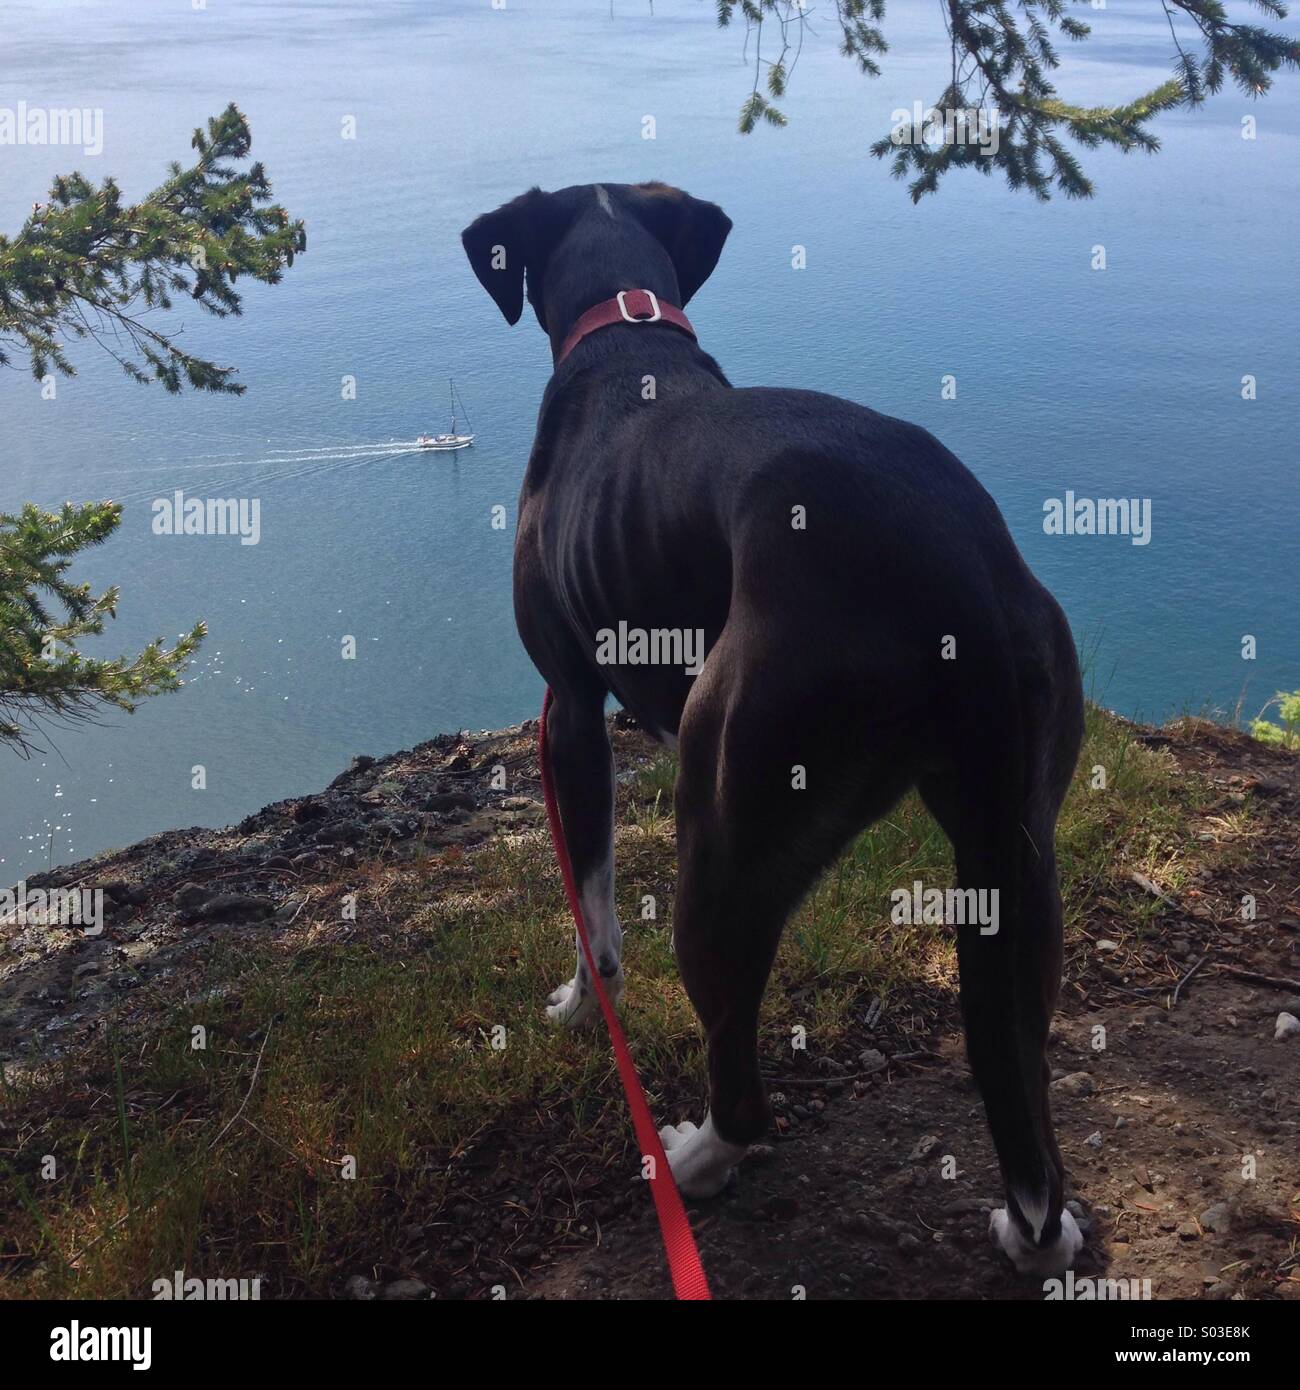 Dark brown dog high on cliff overlooking ocean with boat going by. Stock Photo